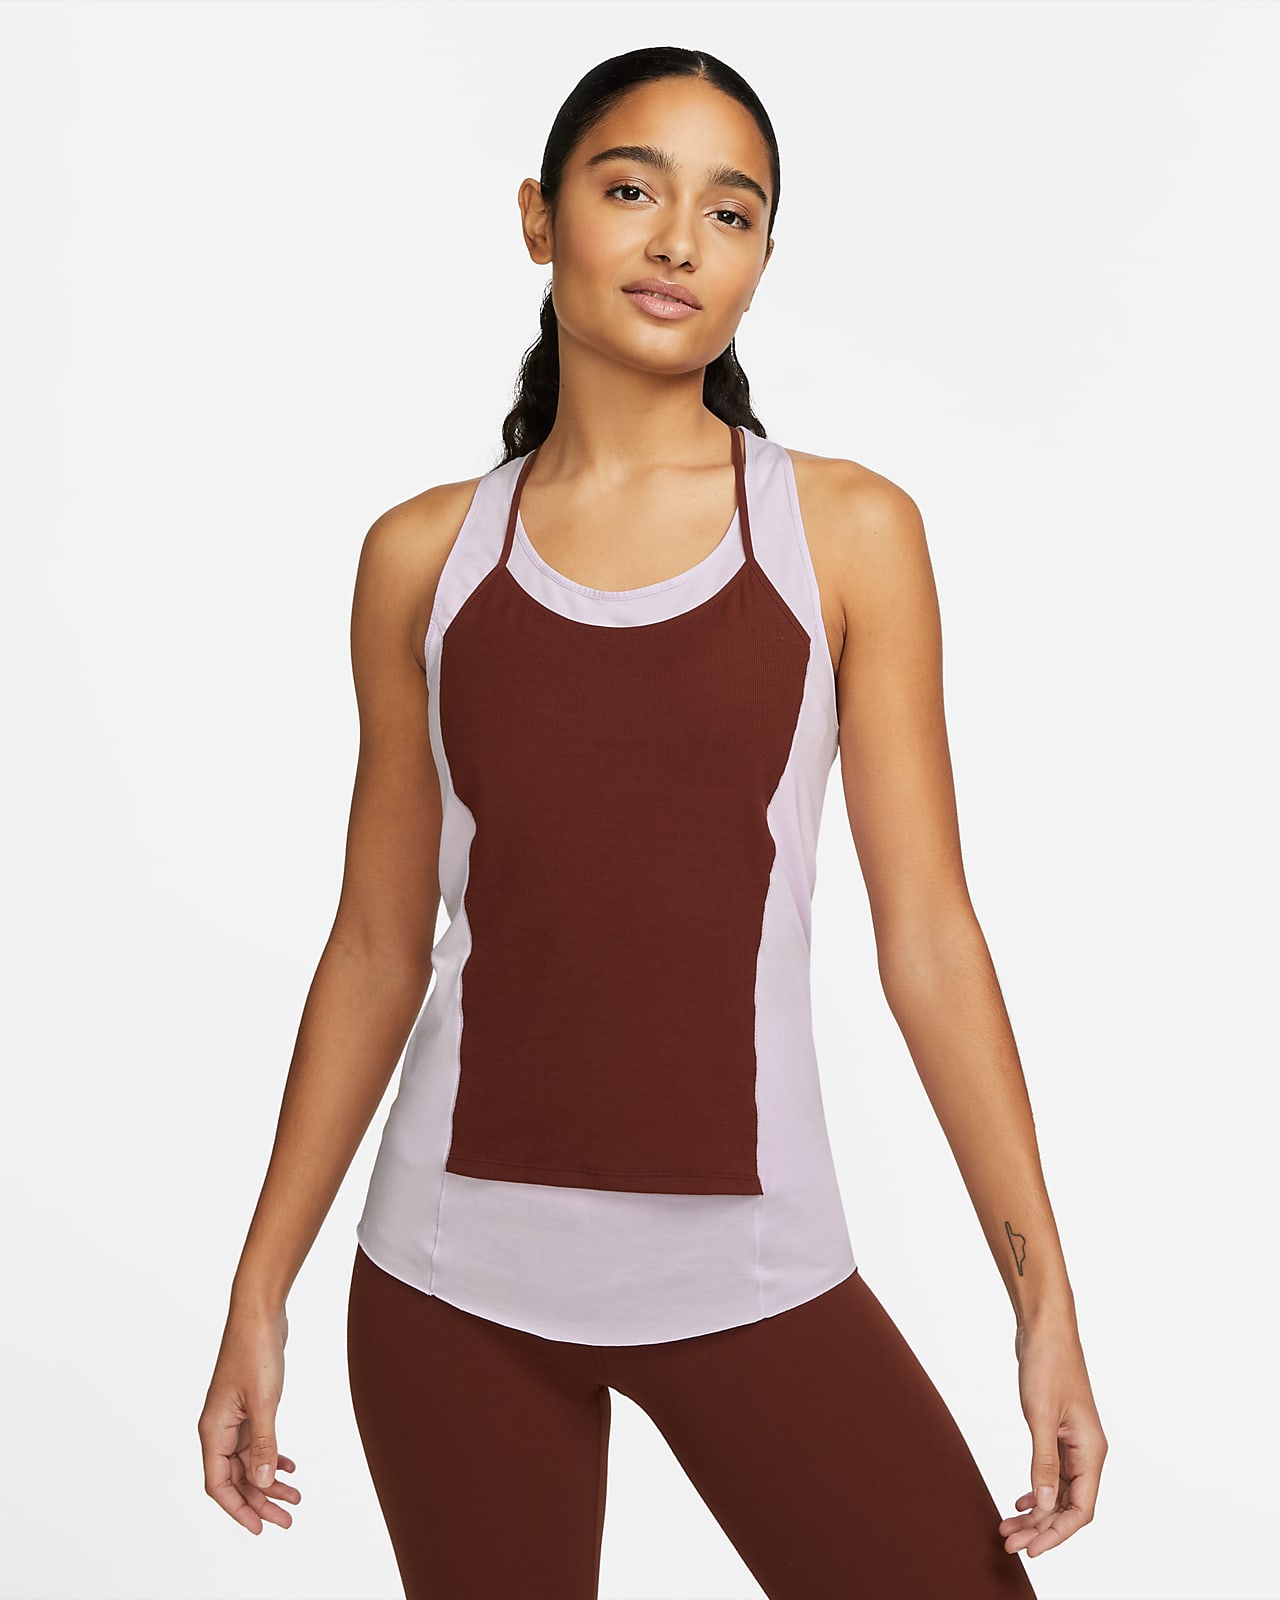 https://static.nike.com/a/images/t_PDP_1280_v1/f_auto,q_auto:eco/81eddee1-9ed1-4f32-8c31-206e3ae6b61b/yoga-dri-fit-luxe-ribbed-tank-bt4ZM6.png